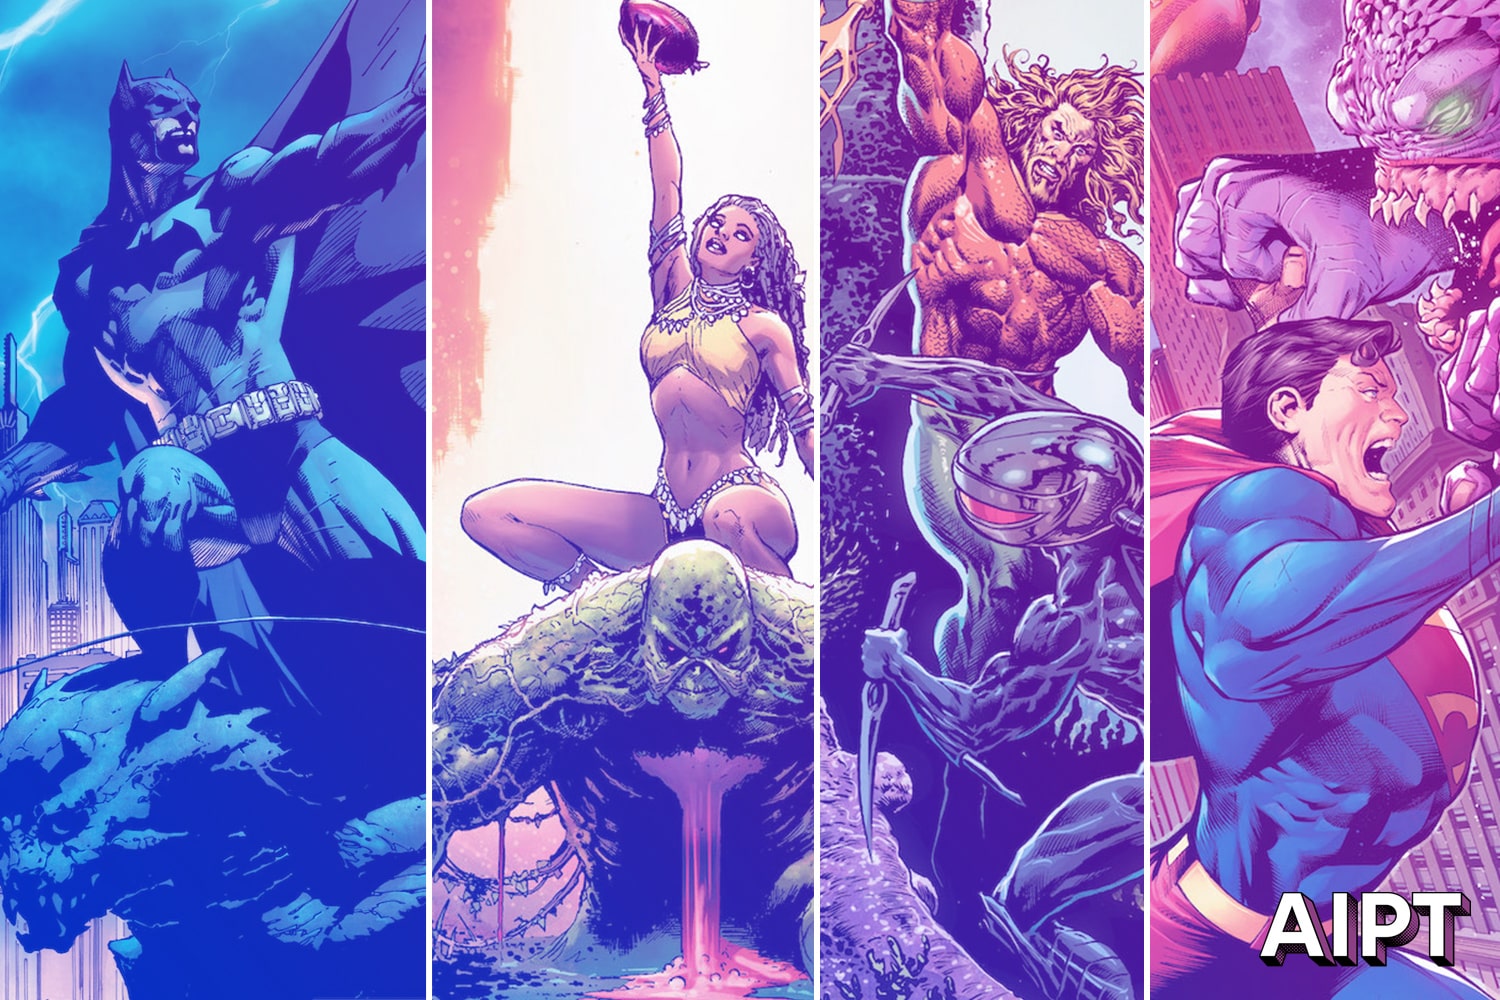 No new comics? Check out the first week titles from DC Comics' DC Digital First program